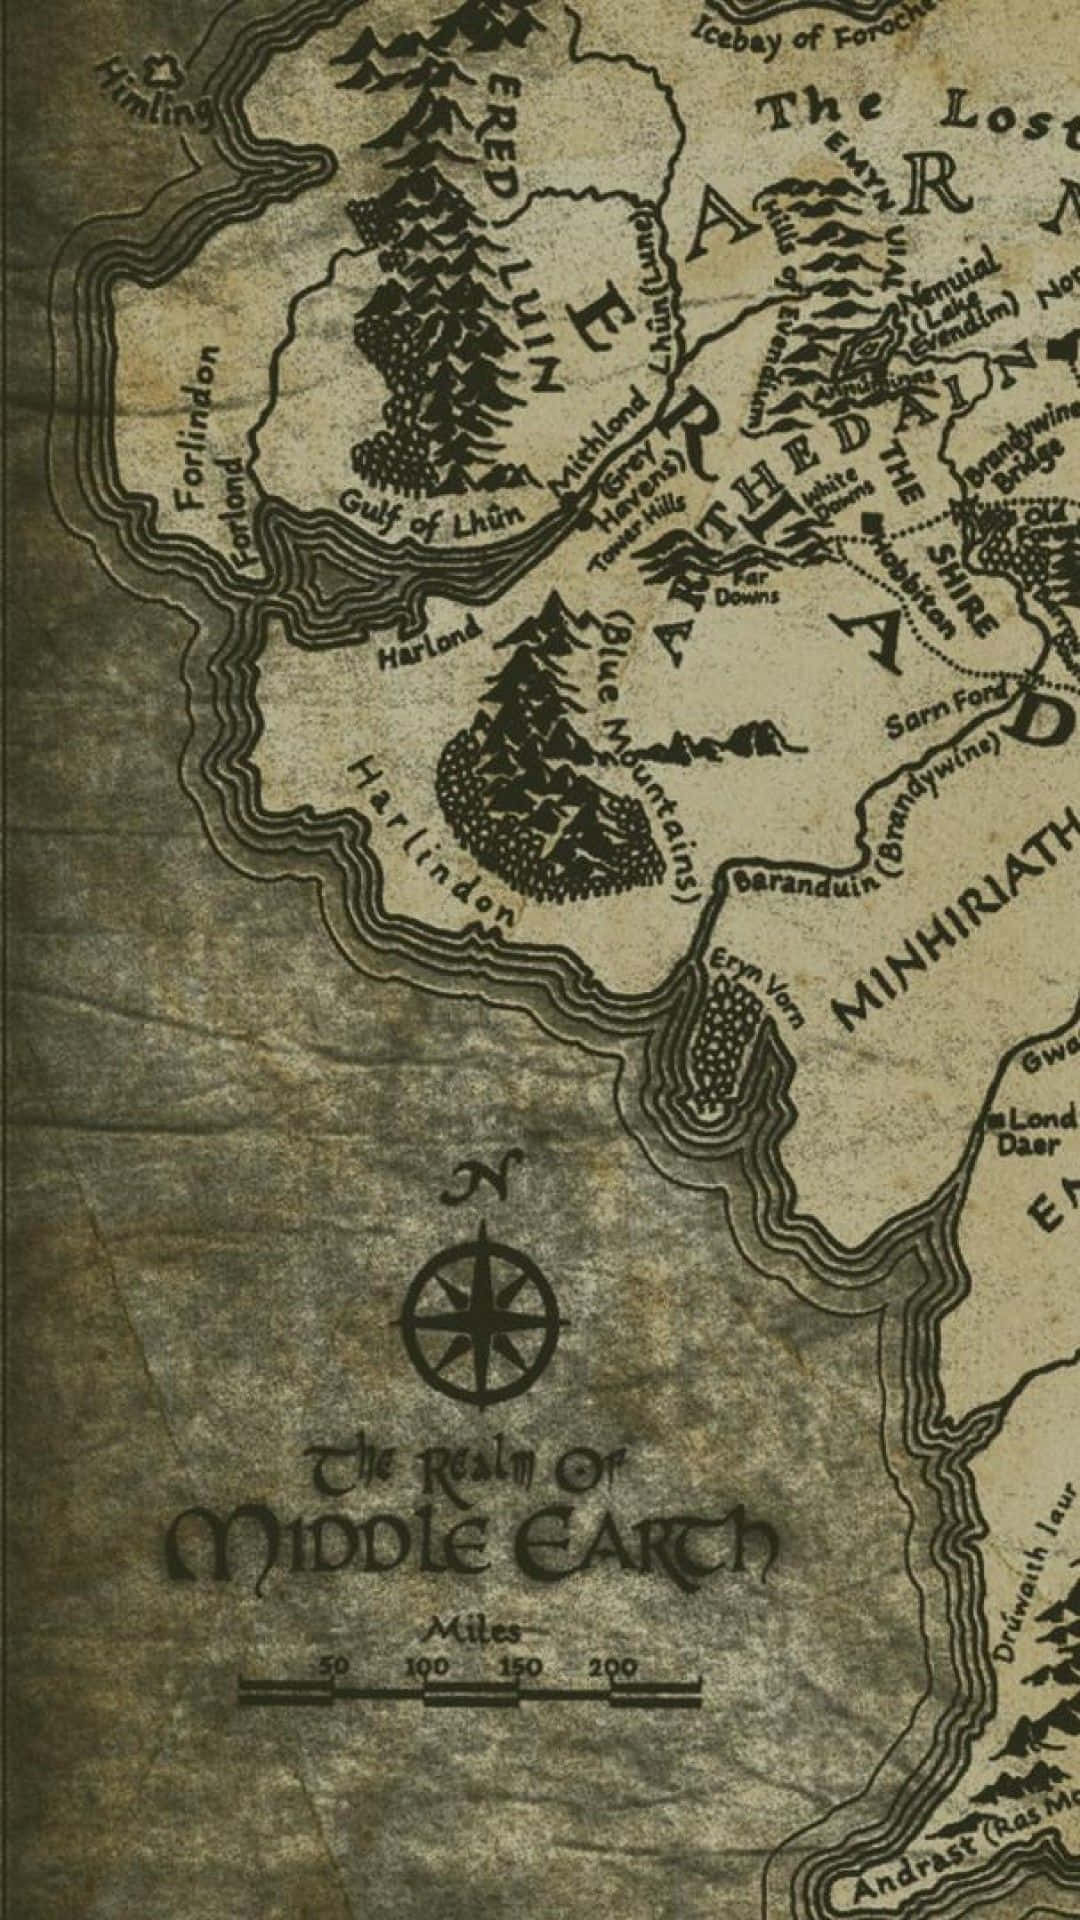 middle earth map wallpaper 1920x1080